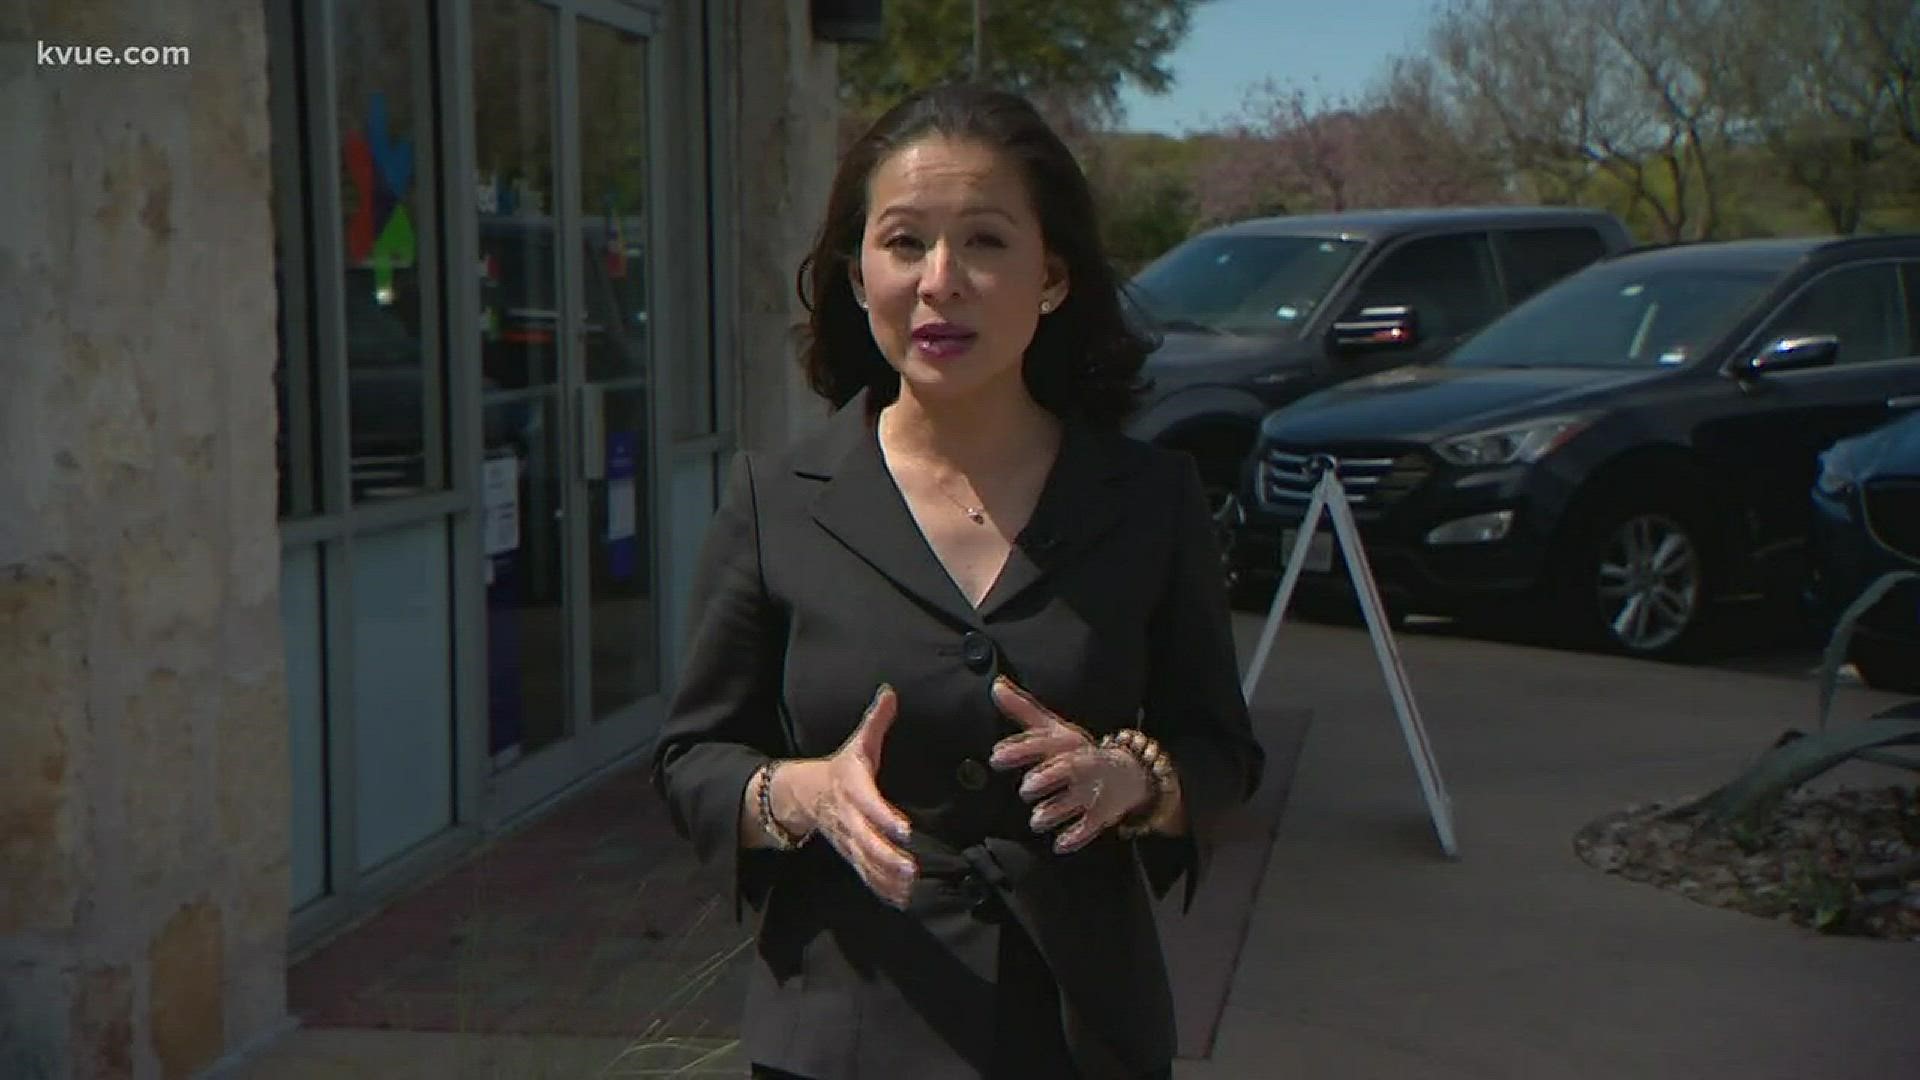 KVUE went to the FedEx where police say the Austin bomber sent a package bomb. Neighboring businesses there are still on edge.